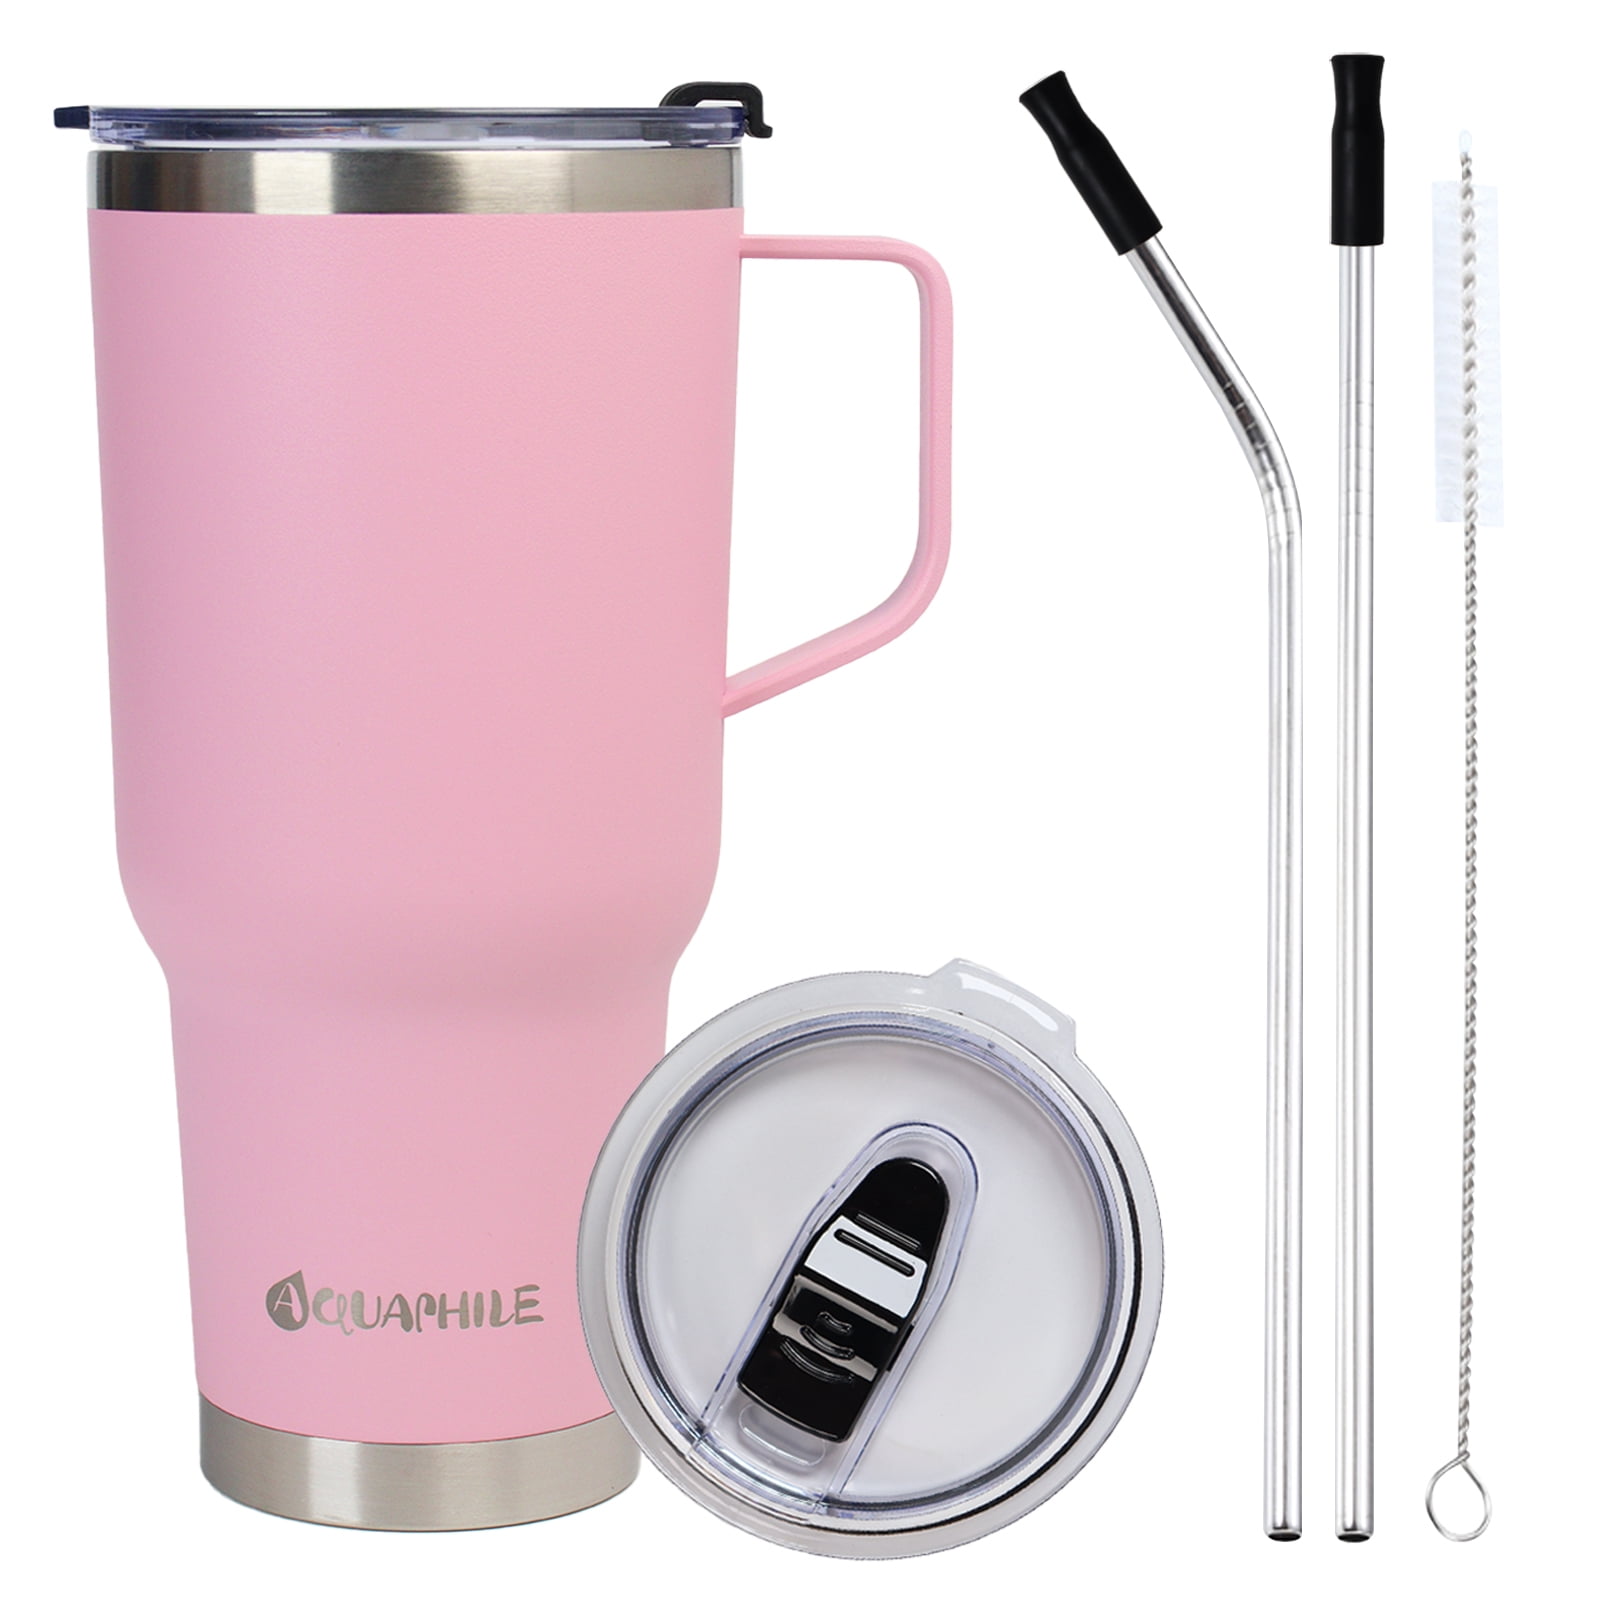 Long-Lasting Insulation Coffee Tumbler Travel Mugs Thermal Cups Vacuum  Stainless Steel Flask Screw Lid Leak Proof for Home Office Outdoor Works  Great for Ice Drinks Hot Beverage - Black Pink White 